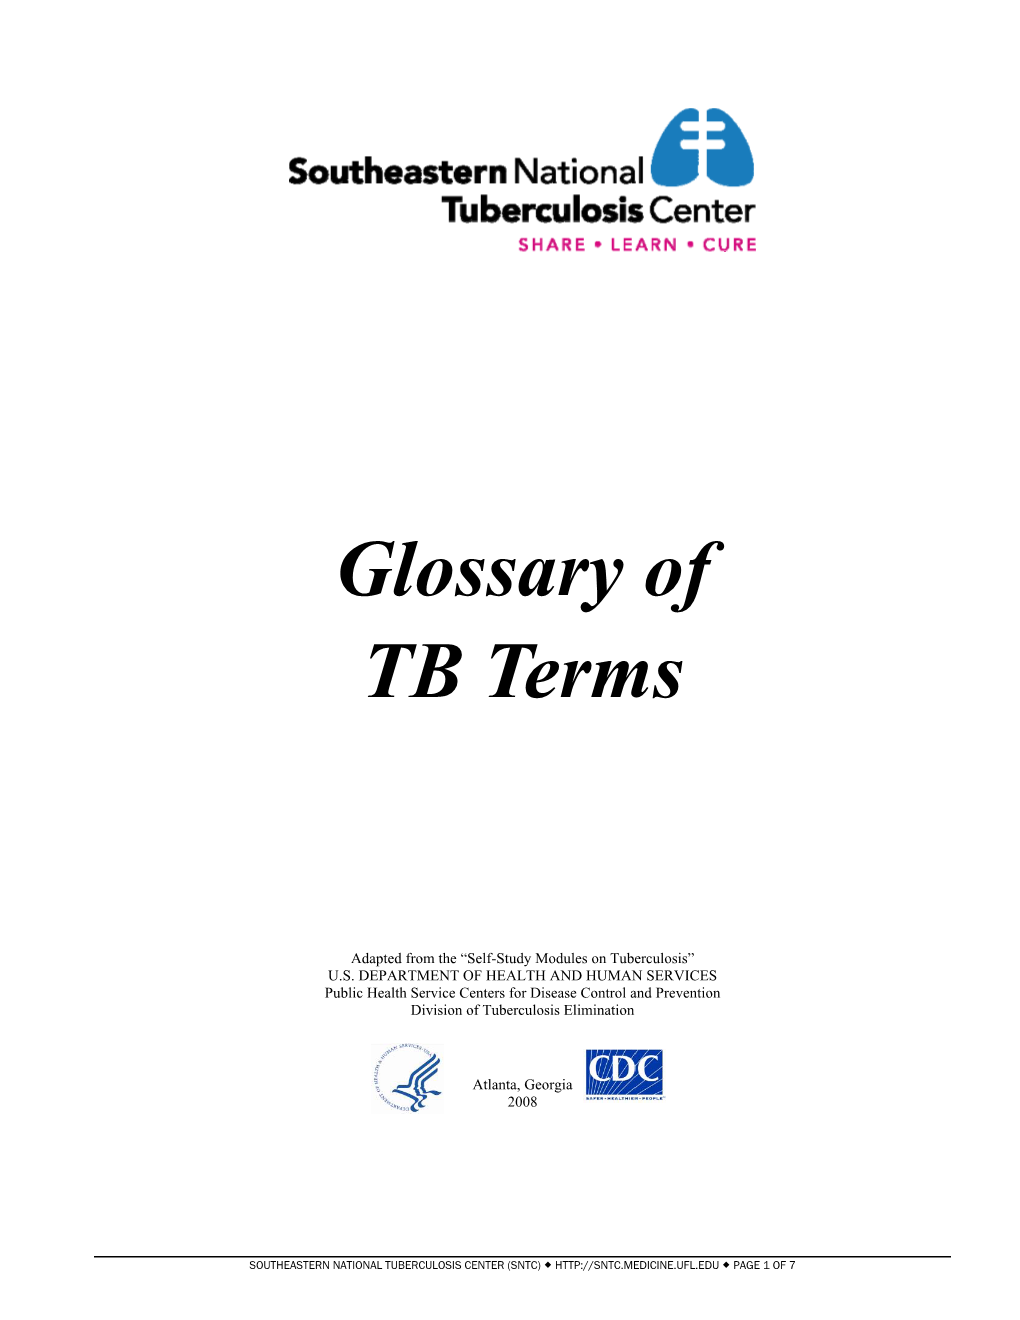 Glossary of TB Terms